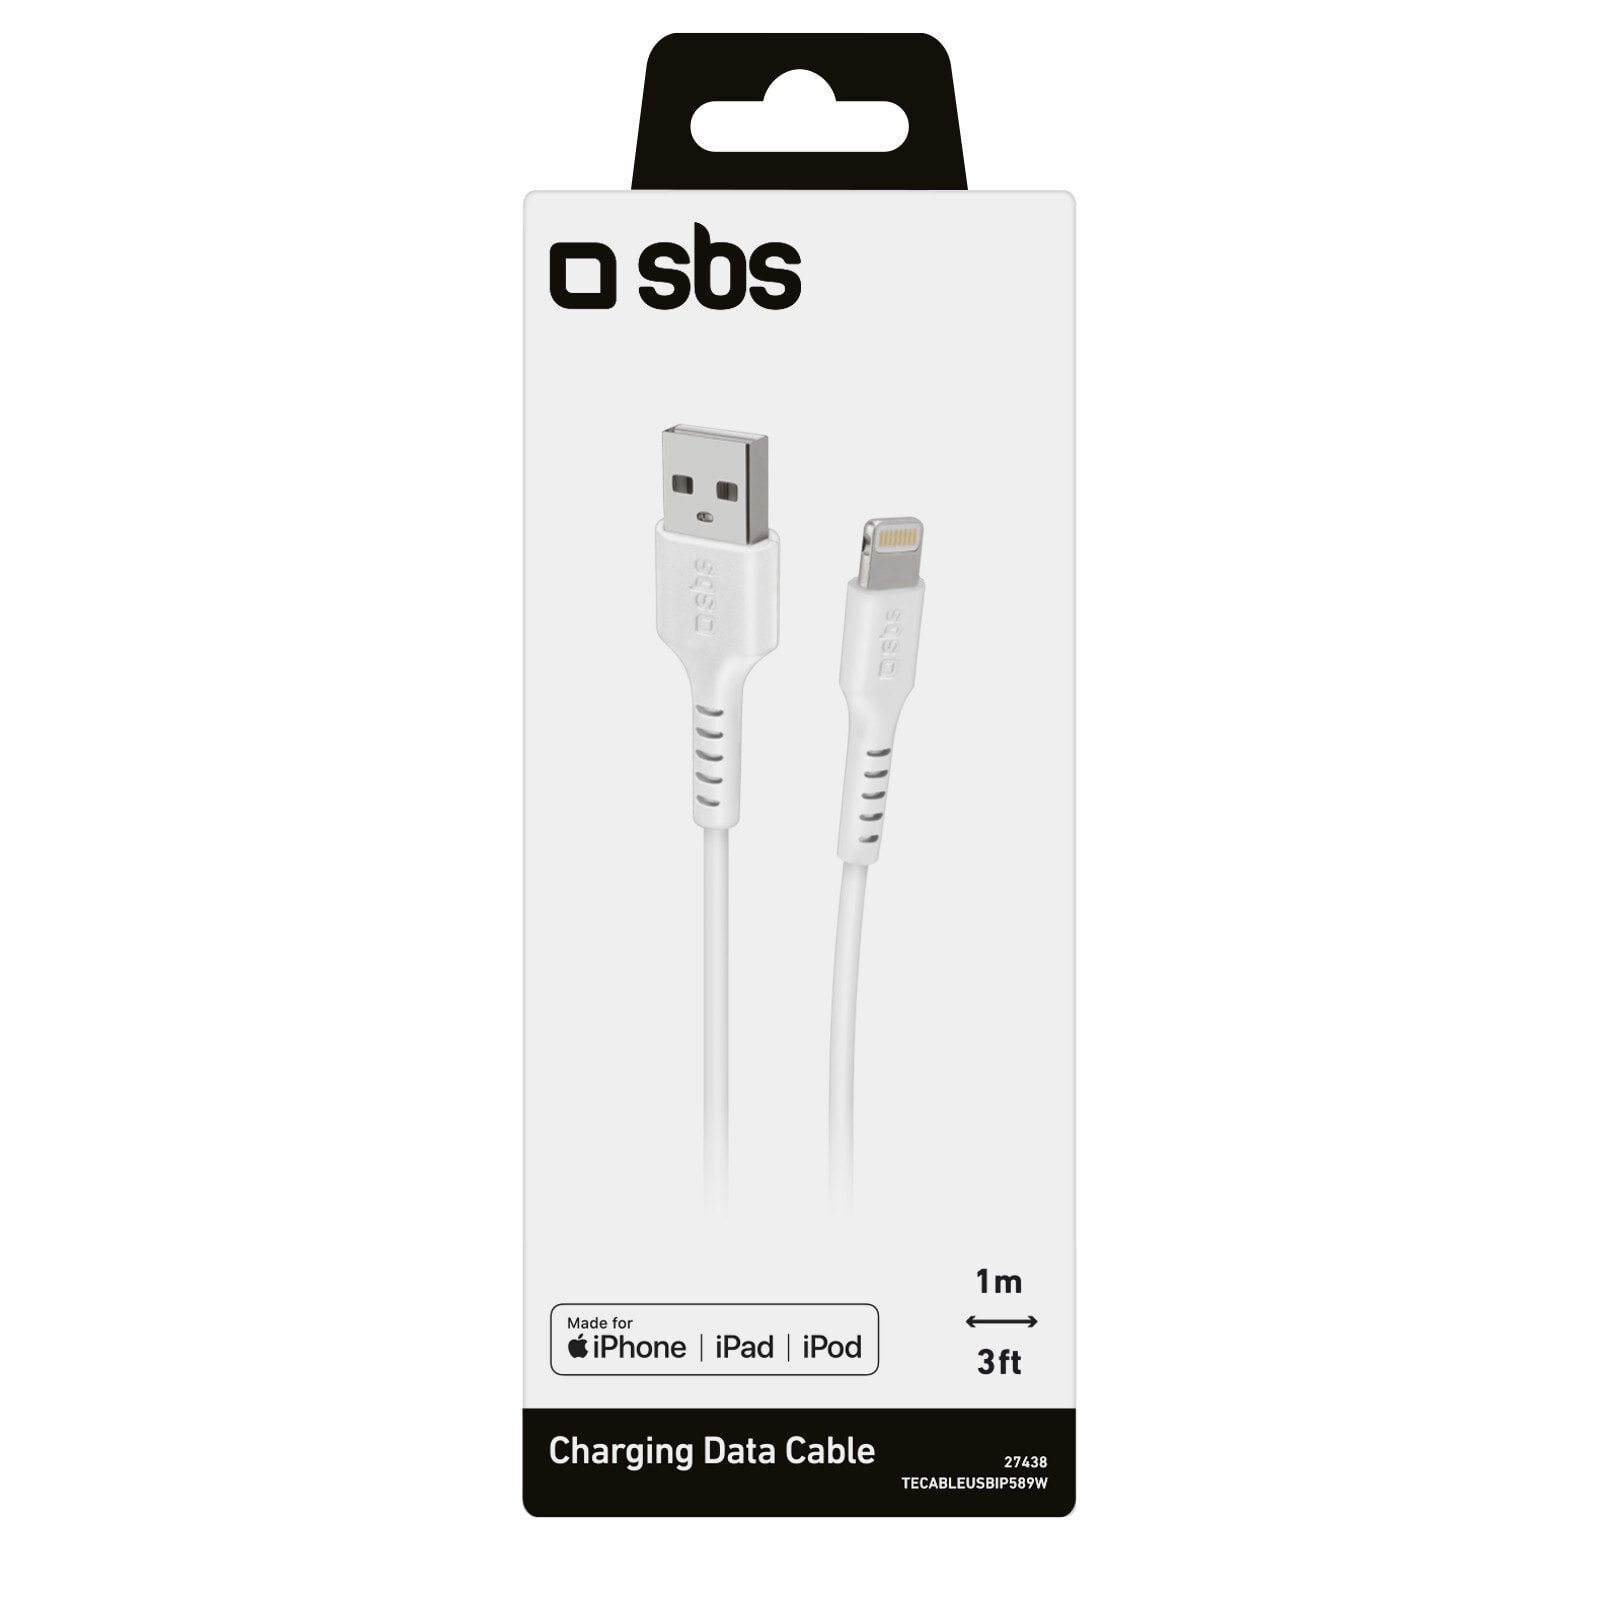 SBS USB Data Cable Apple Lightning C-89 1m white - Cable - Digital